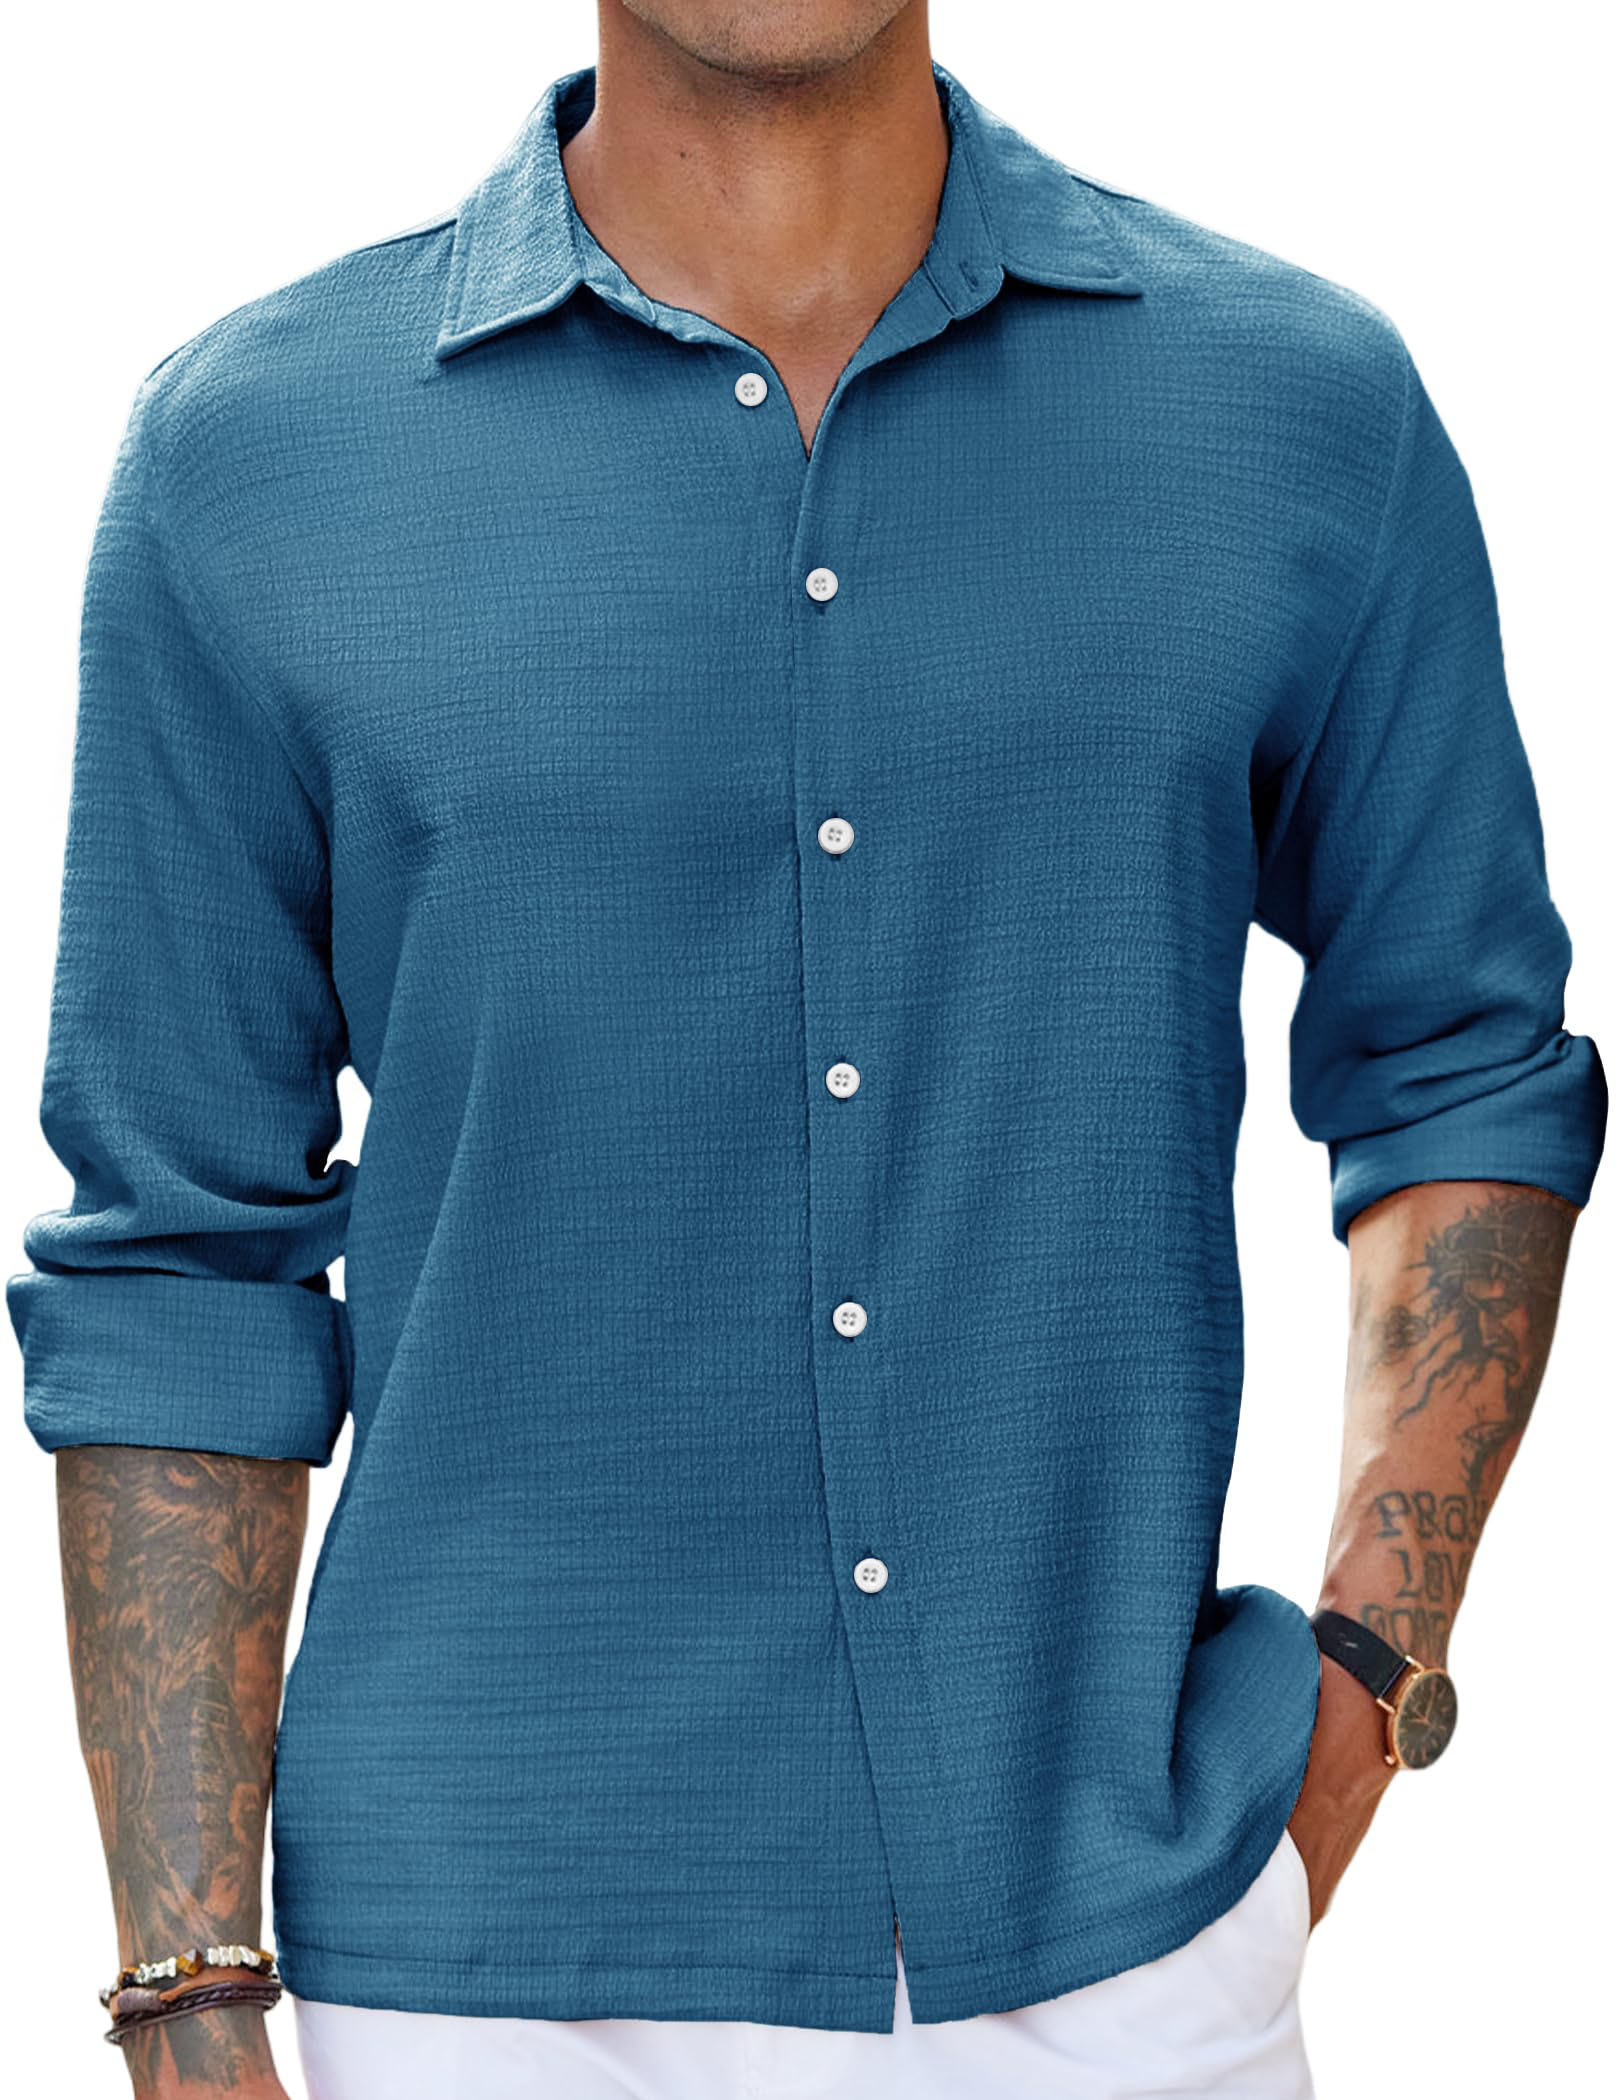 Men's Casual Long Sleeve Button-down Shirt Textured Wrinkle-free Shirt